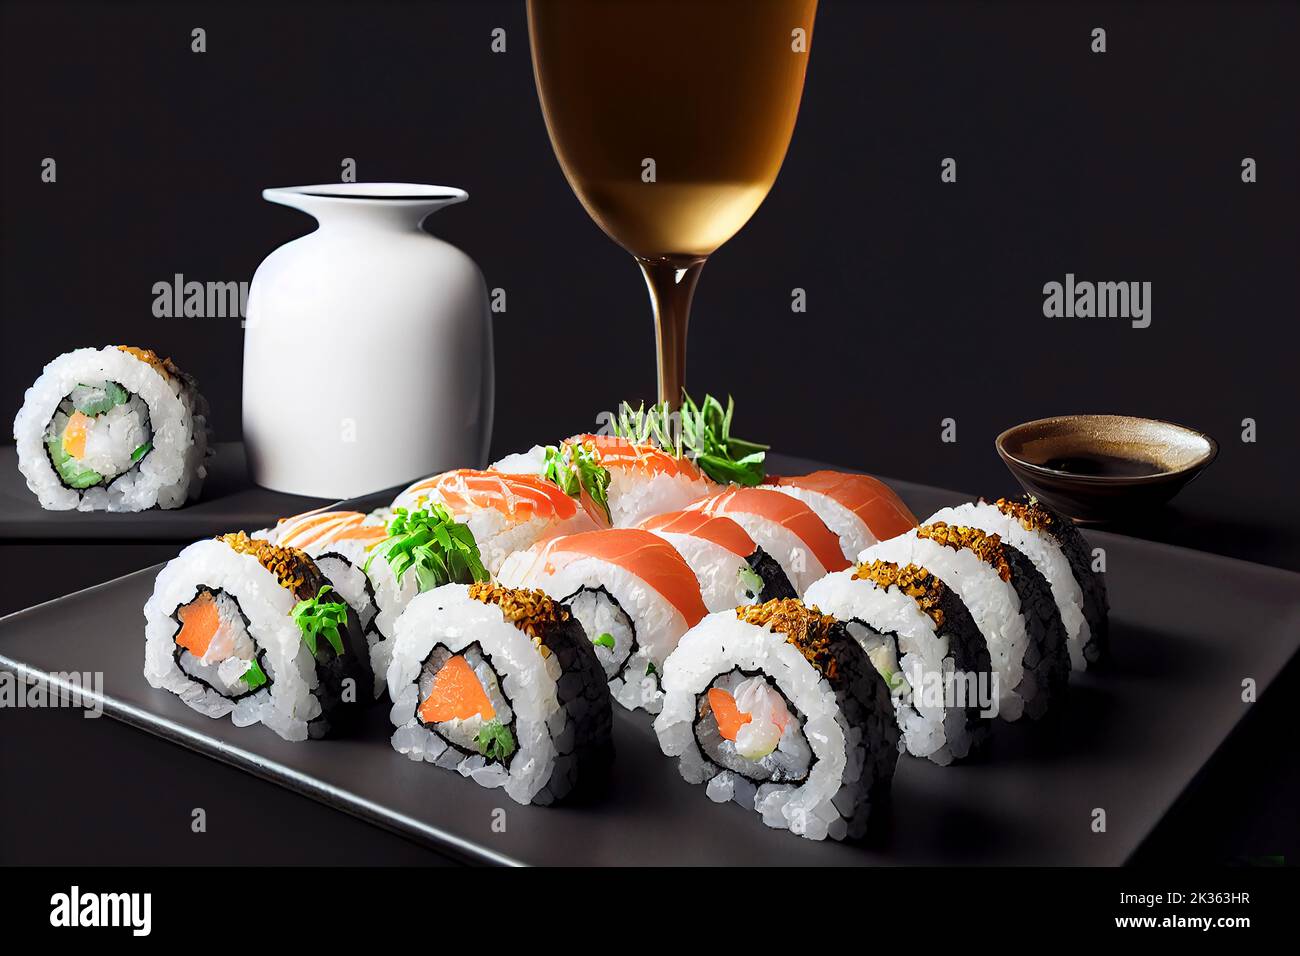 Beautifully plated sushi paired with sake and plum wine, food photography, black background, dramatic lighting, Stock Photo